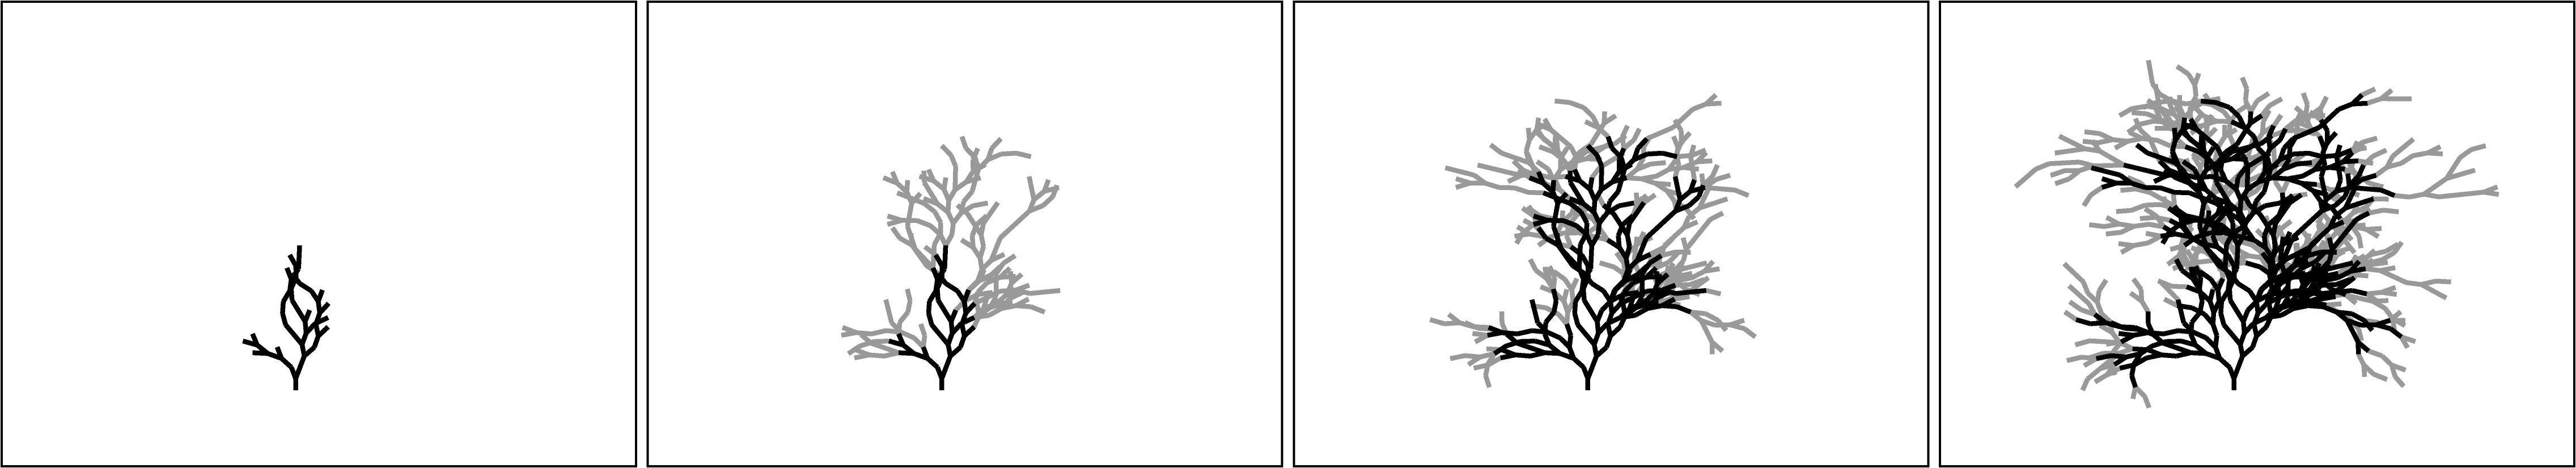 neuron_growth.png